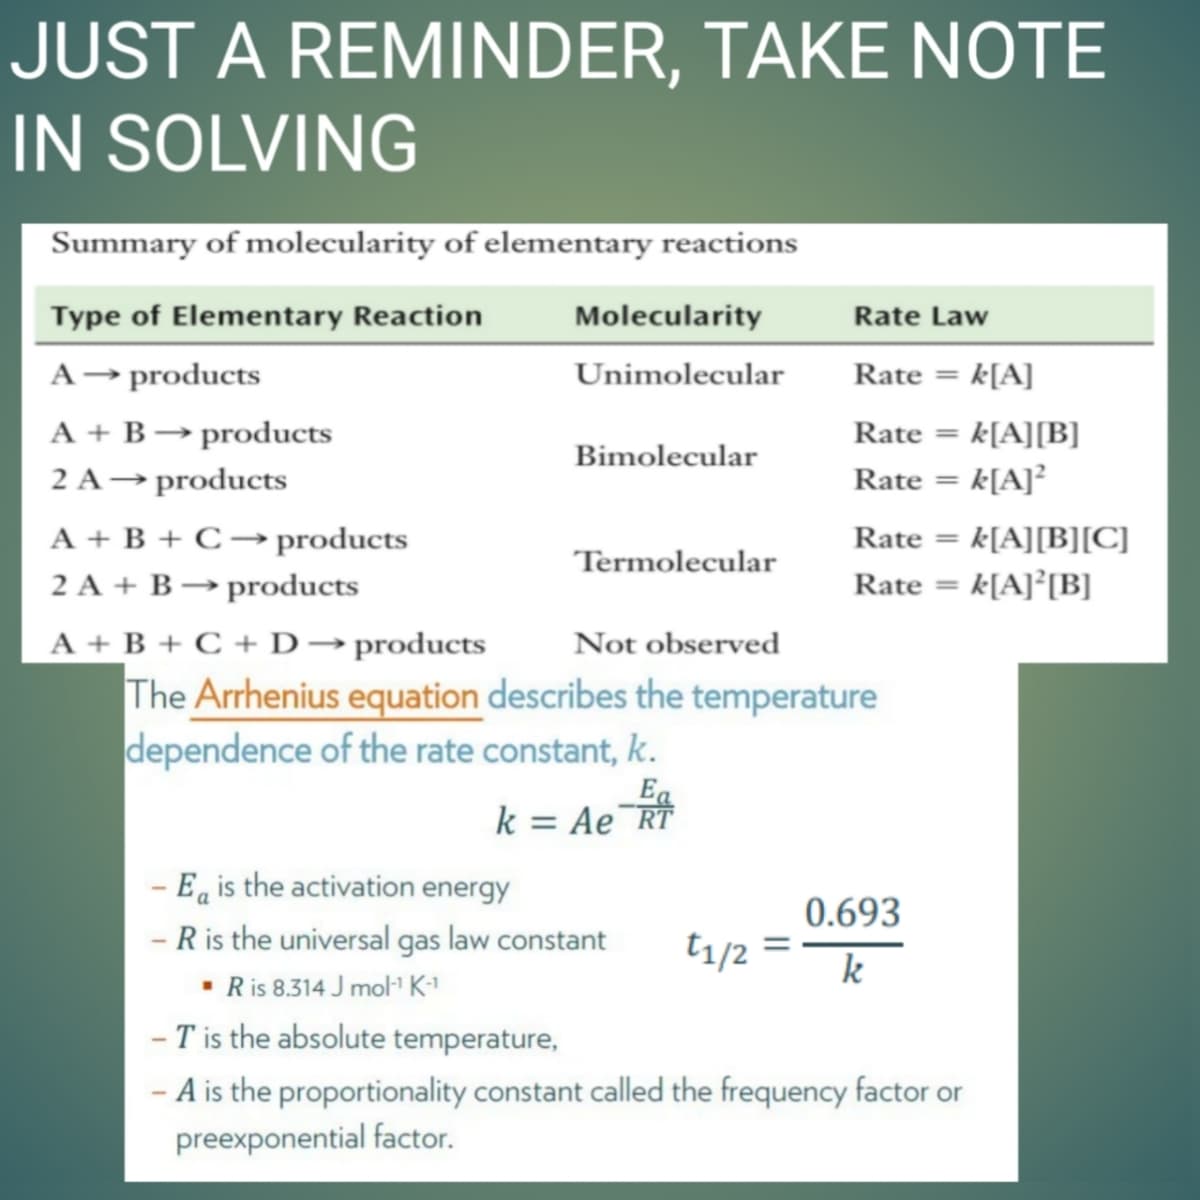 JUST A REMINDER, TAKE NOTE
IN SOLVING
Summary of molecularity of elementary reactions
Type of Elementary Reaction
Molecularity
Rate Law
A→ products
Unimolecular
Rate = k[A]
%3D
A + B → products
2 A→products
Rate
k[A][B]
%3D
Bimolecular
Rate = k[A]²
%3D
A + B + C → products
2 A + B → products
Rate = k[A][B][C]
%3D
Termolecular
Rate = k[A]°[B]
A + B + C + D→ products
The Arrhenius equation describes the temperature
dependence of the rate constant, k.
Not observed
Ea
k = Ae RT
- E, is the activation energy
- R is the universal gas law constant
• Ris 8.314 J mol K
- T is the absolute temperature,
- A is the proportionality constant called the frequency factor or
0.693
t1/2 =
k
preexponential factor.
